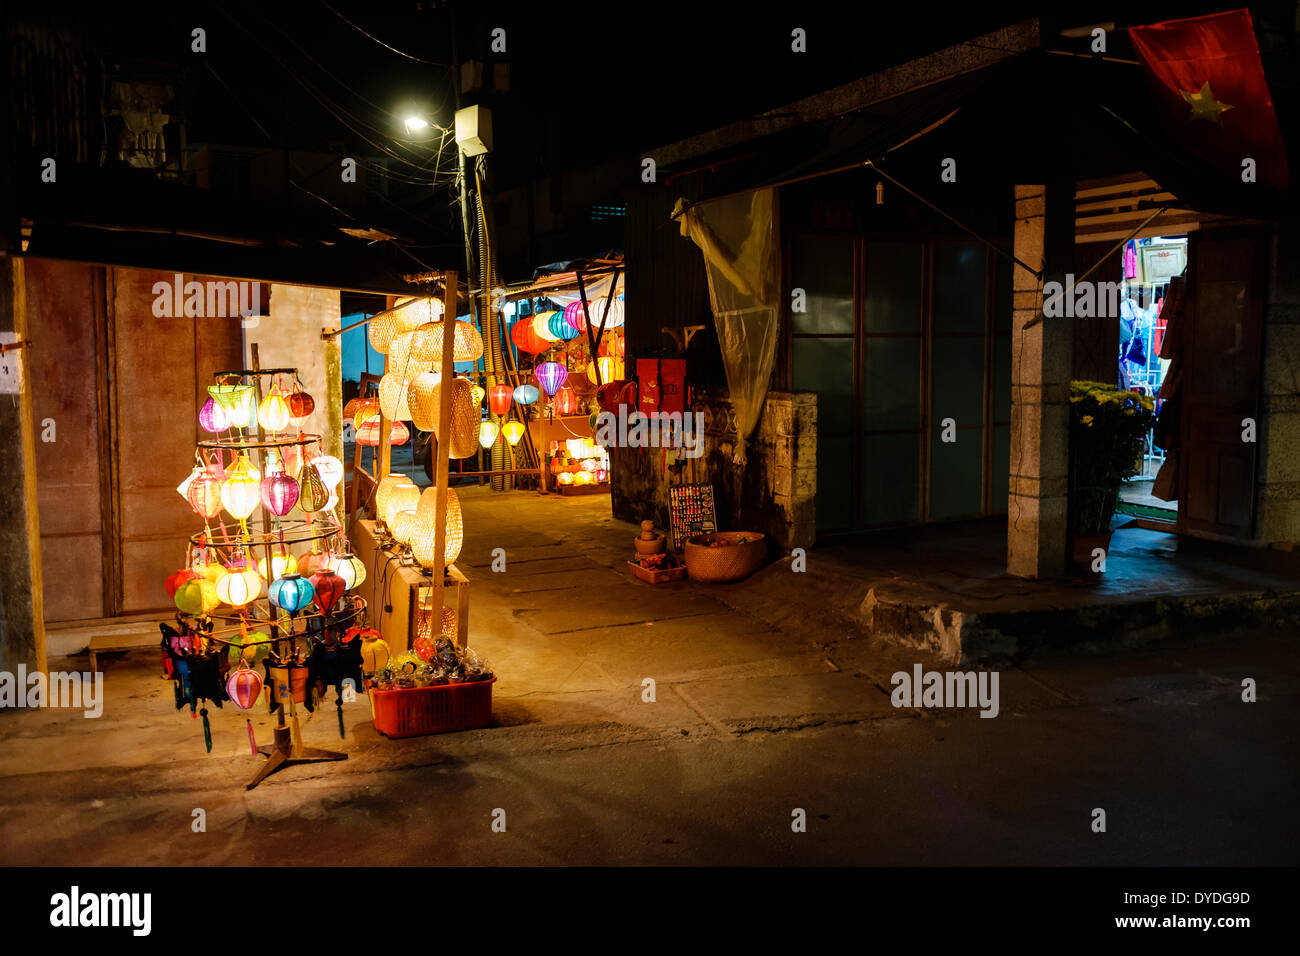 A shop selling lanterns in Hoi An. Stock Photo